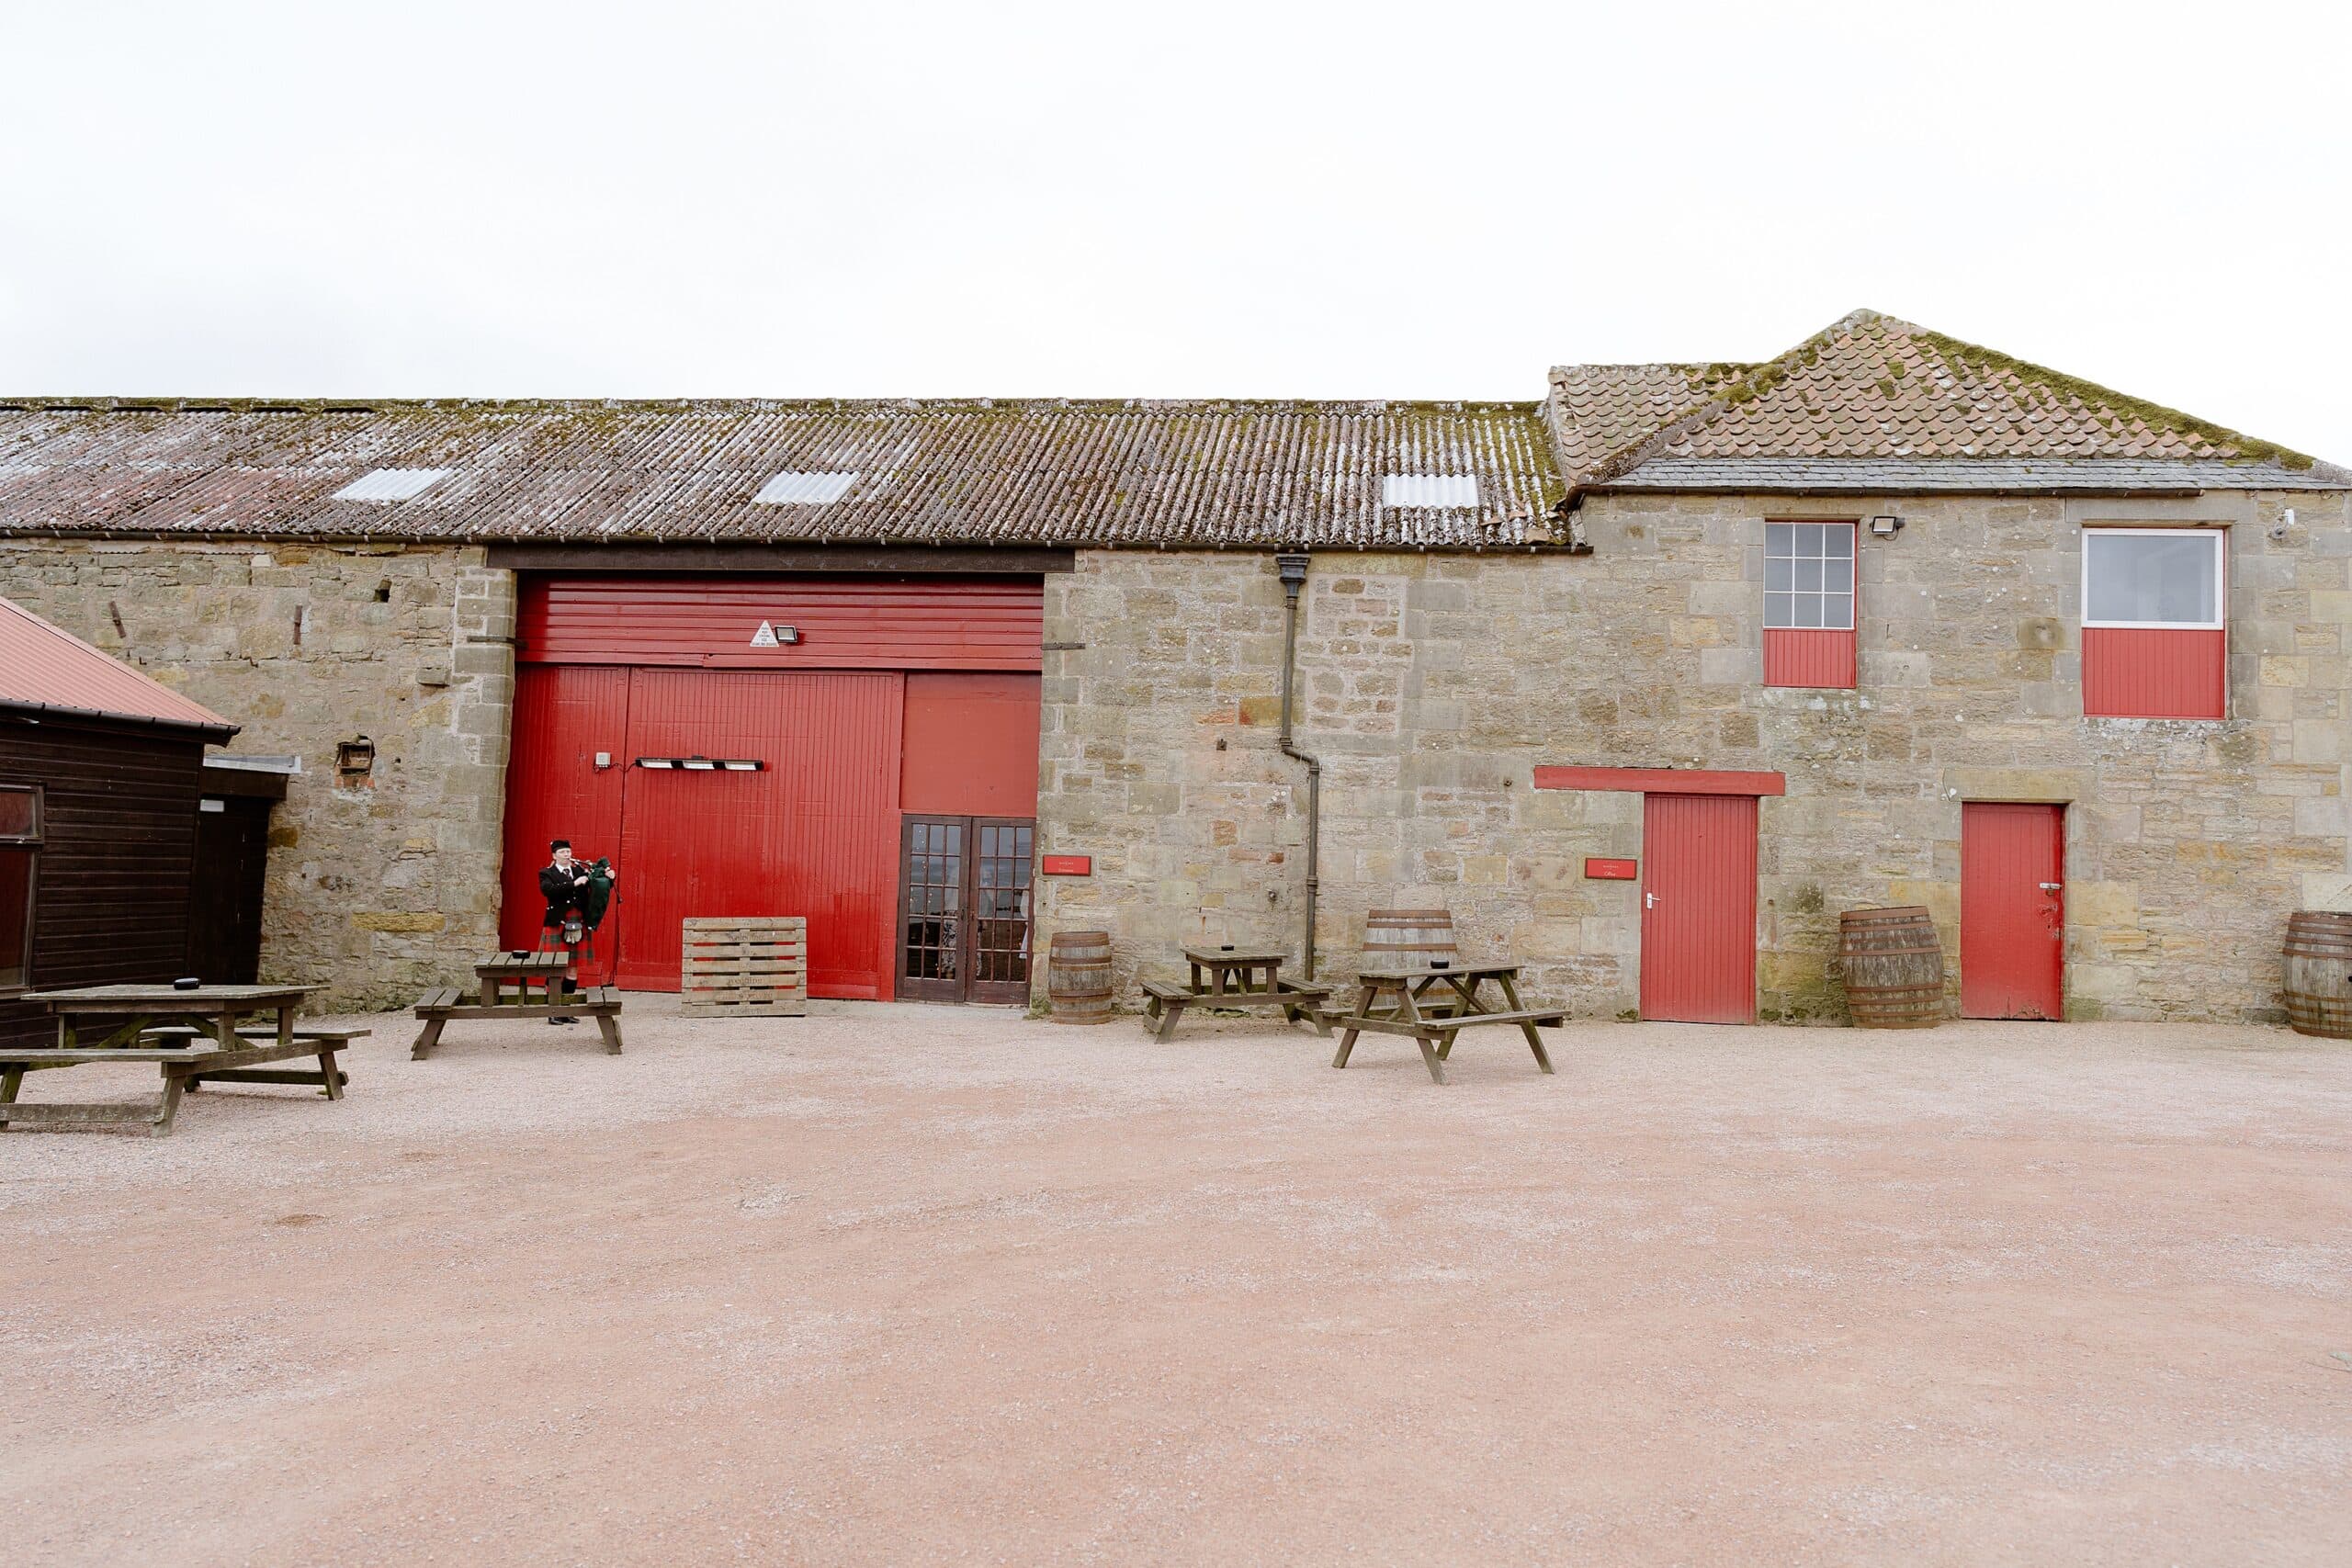 exterior outside view of kinkell byre wedding venue in st andrews scotland showing a piper with bagpipes standing in front of a red barn door